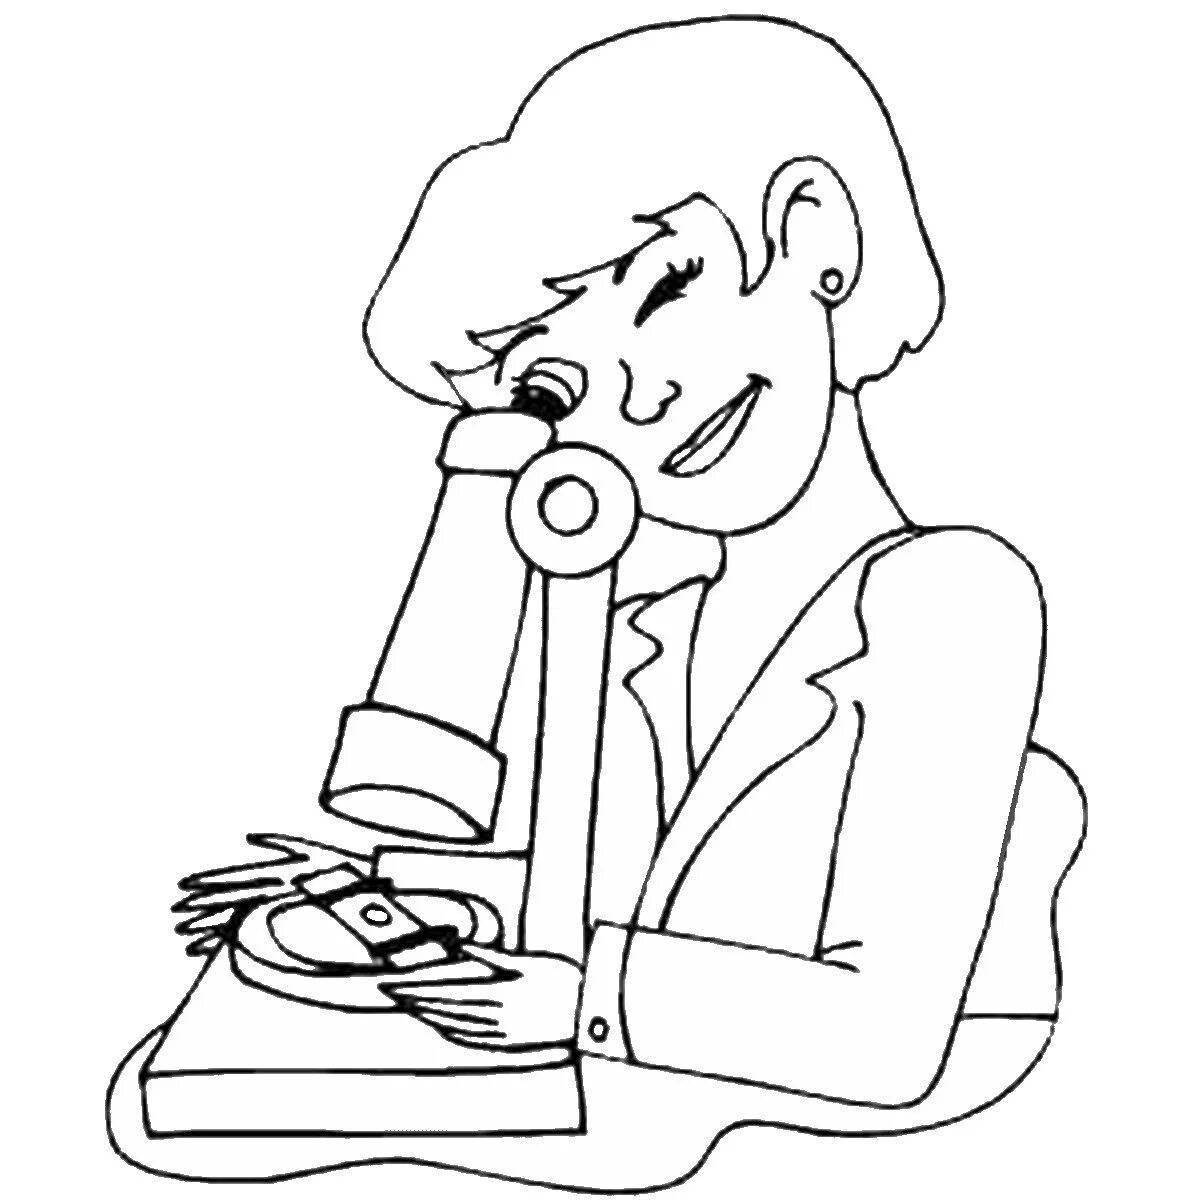 Coloring book cheerful accountant